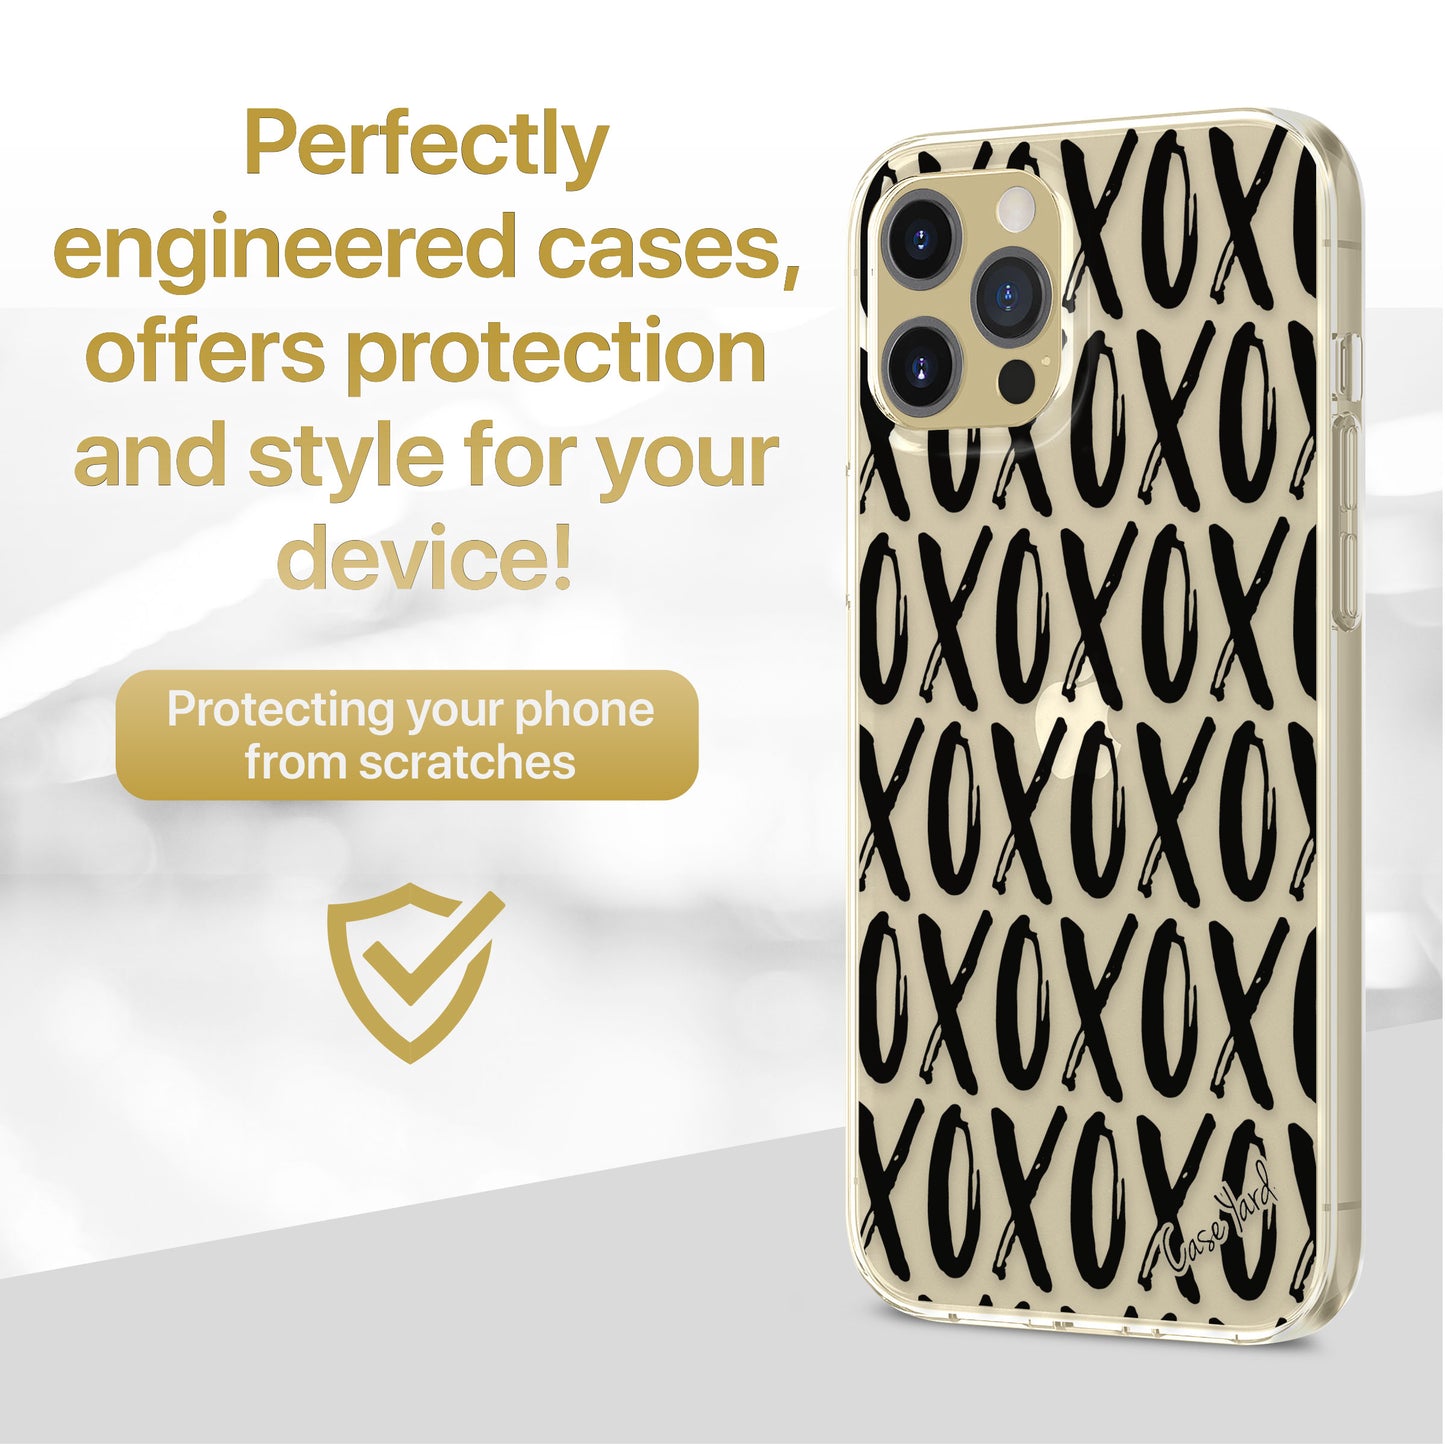 TPU Clear case with (XOXO) Design for iPhone & Samsung Phones